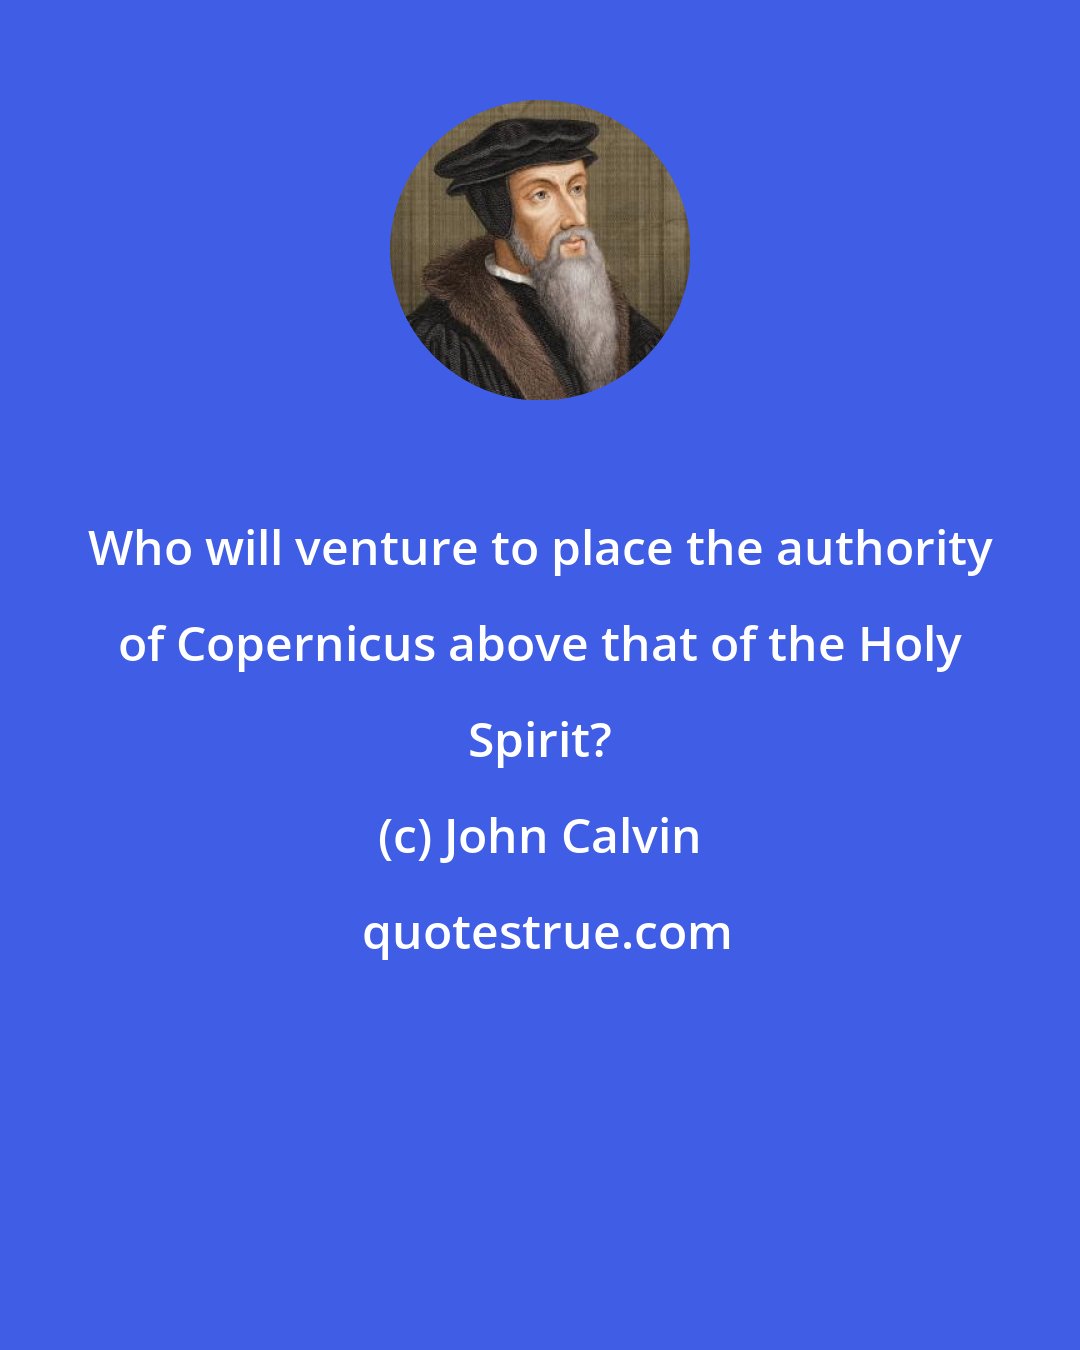 John Calvin: Who will venture to place the authority of Copernicus above that of the Holy Spirit?